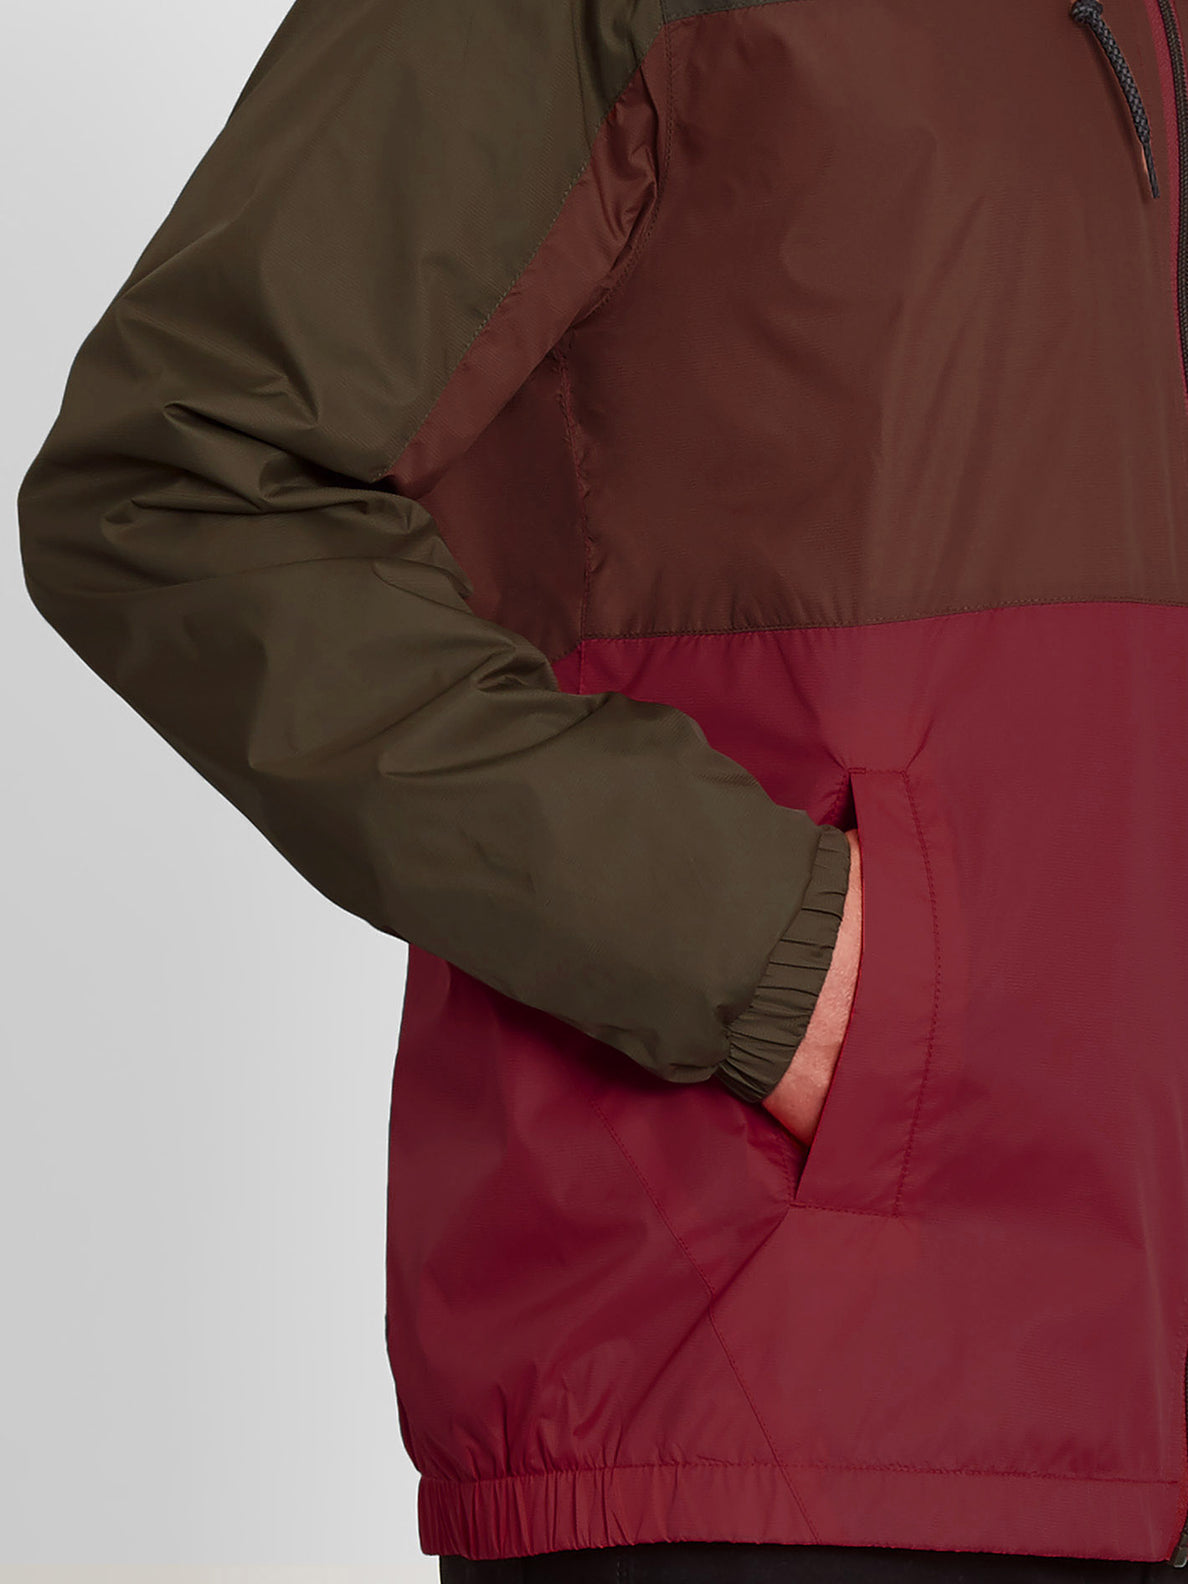 Ermont Jacket - Carmine Red (A1532002_CMR) [8]